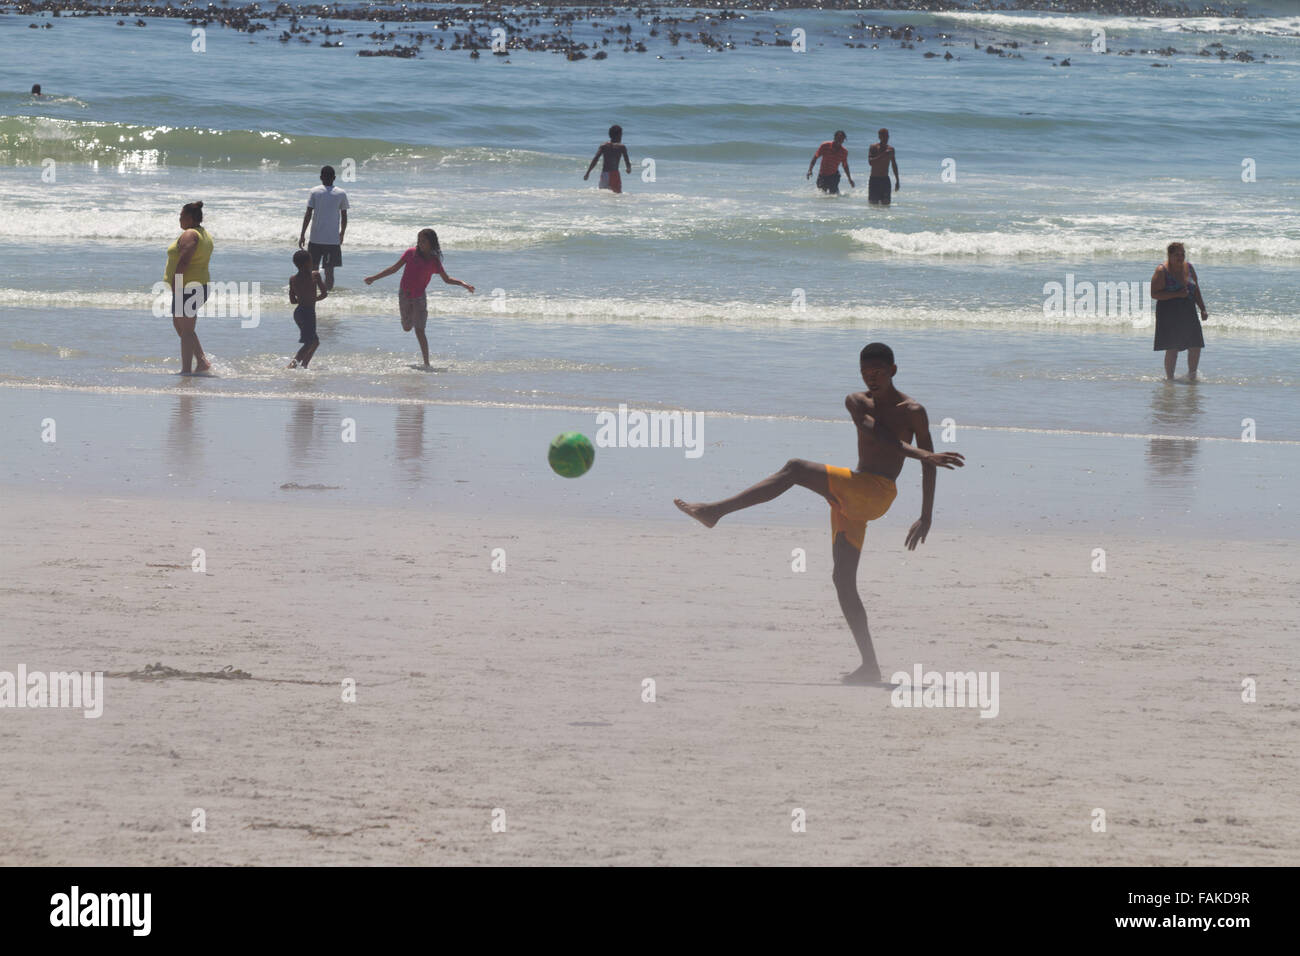 African people on Melkbosstrand beach near Cape Town, South Africa Stock Photo